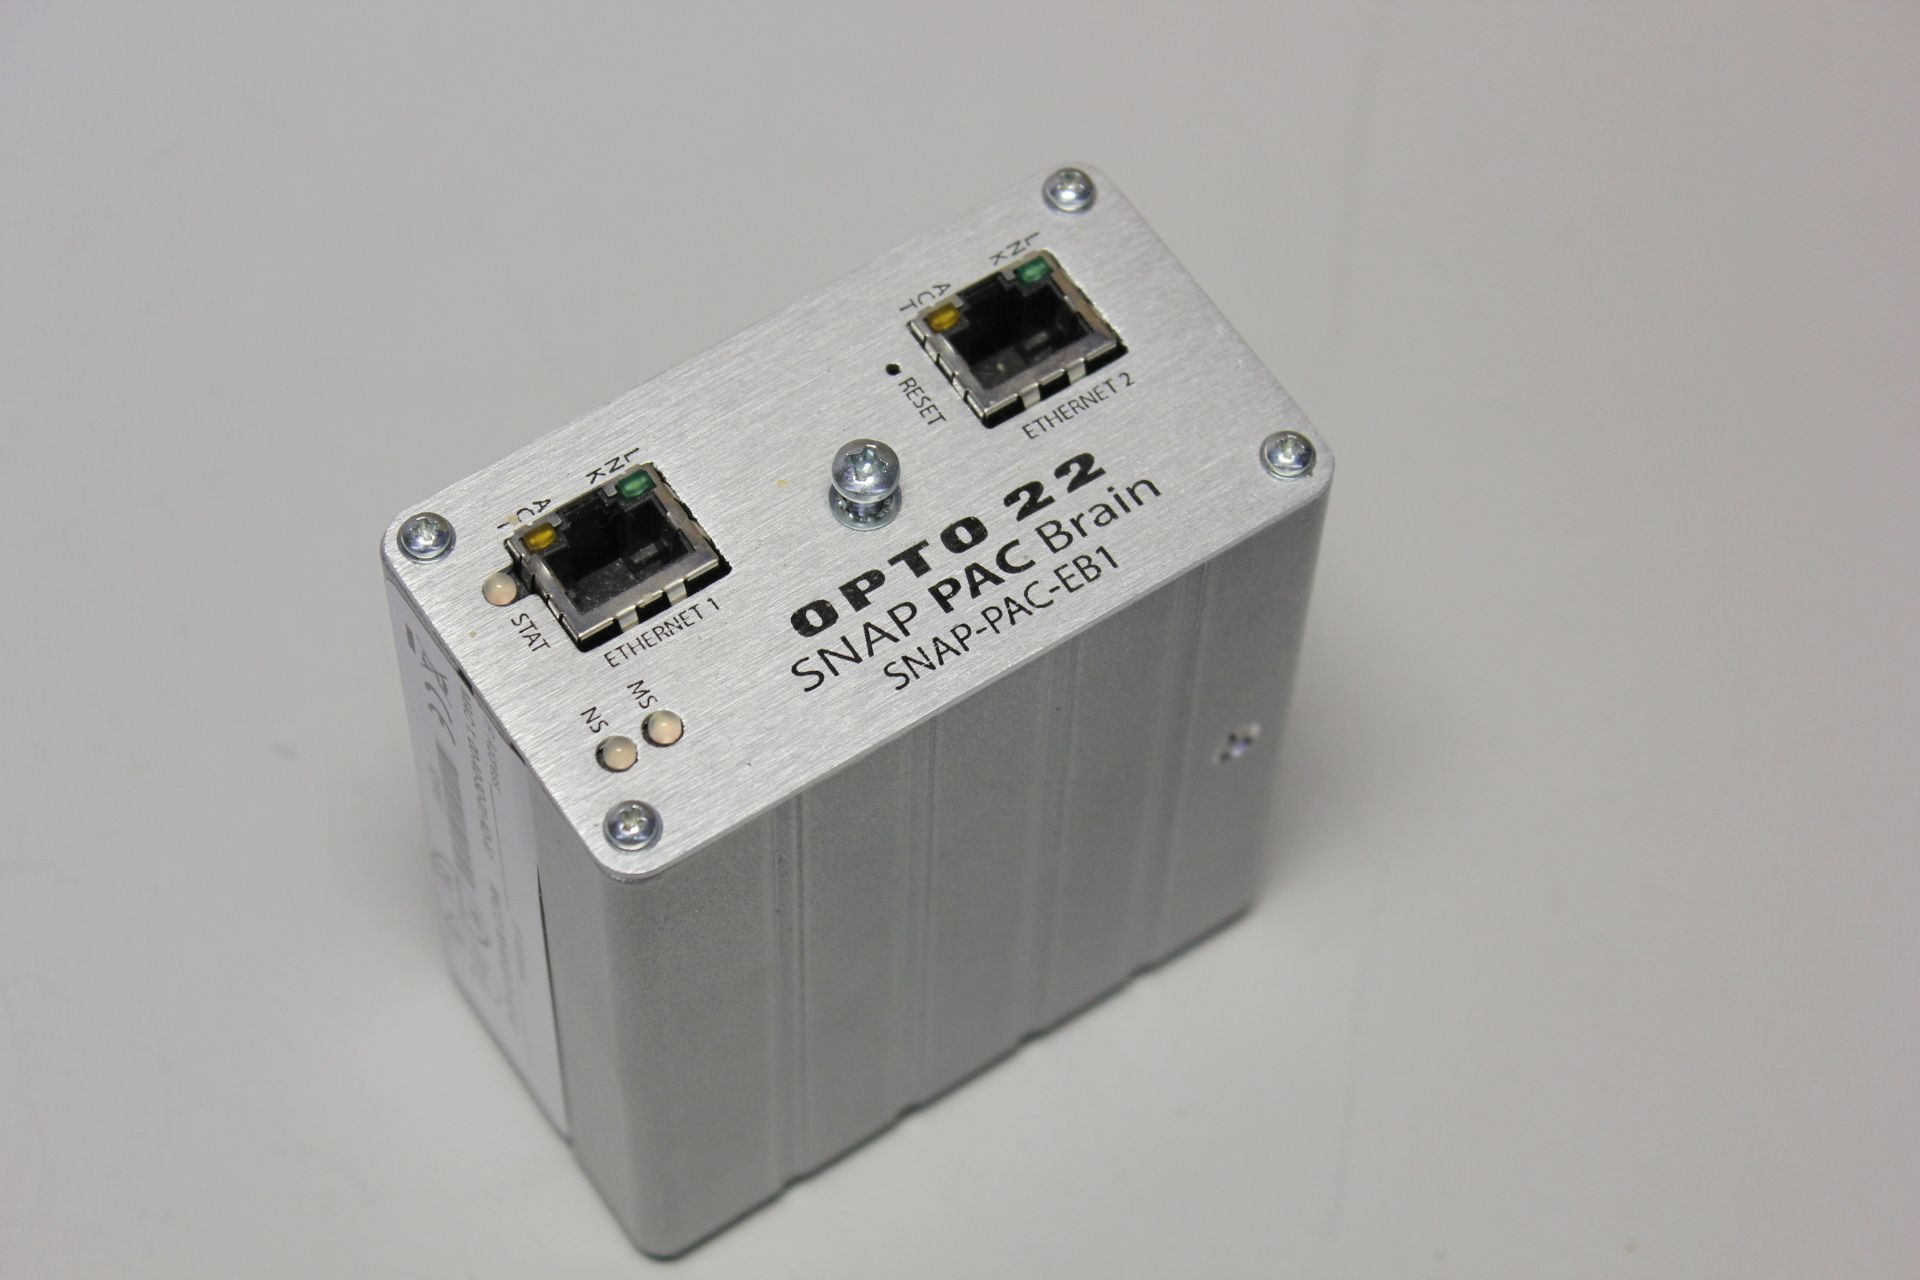 OPTO 22 SNAP PAC ETHERNET BRAIN